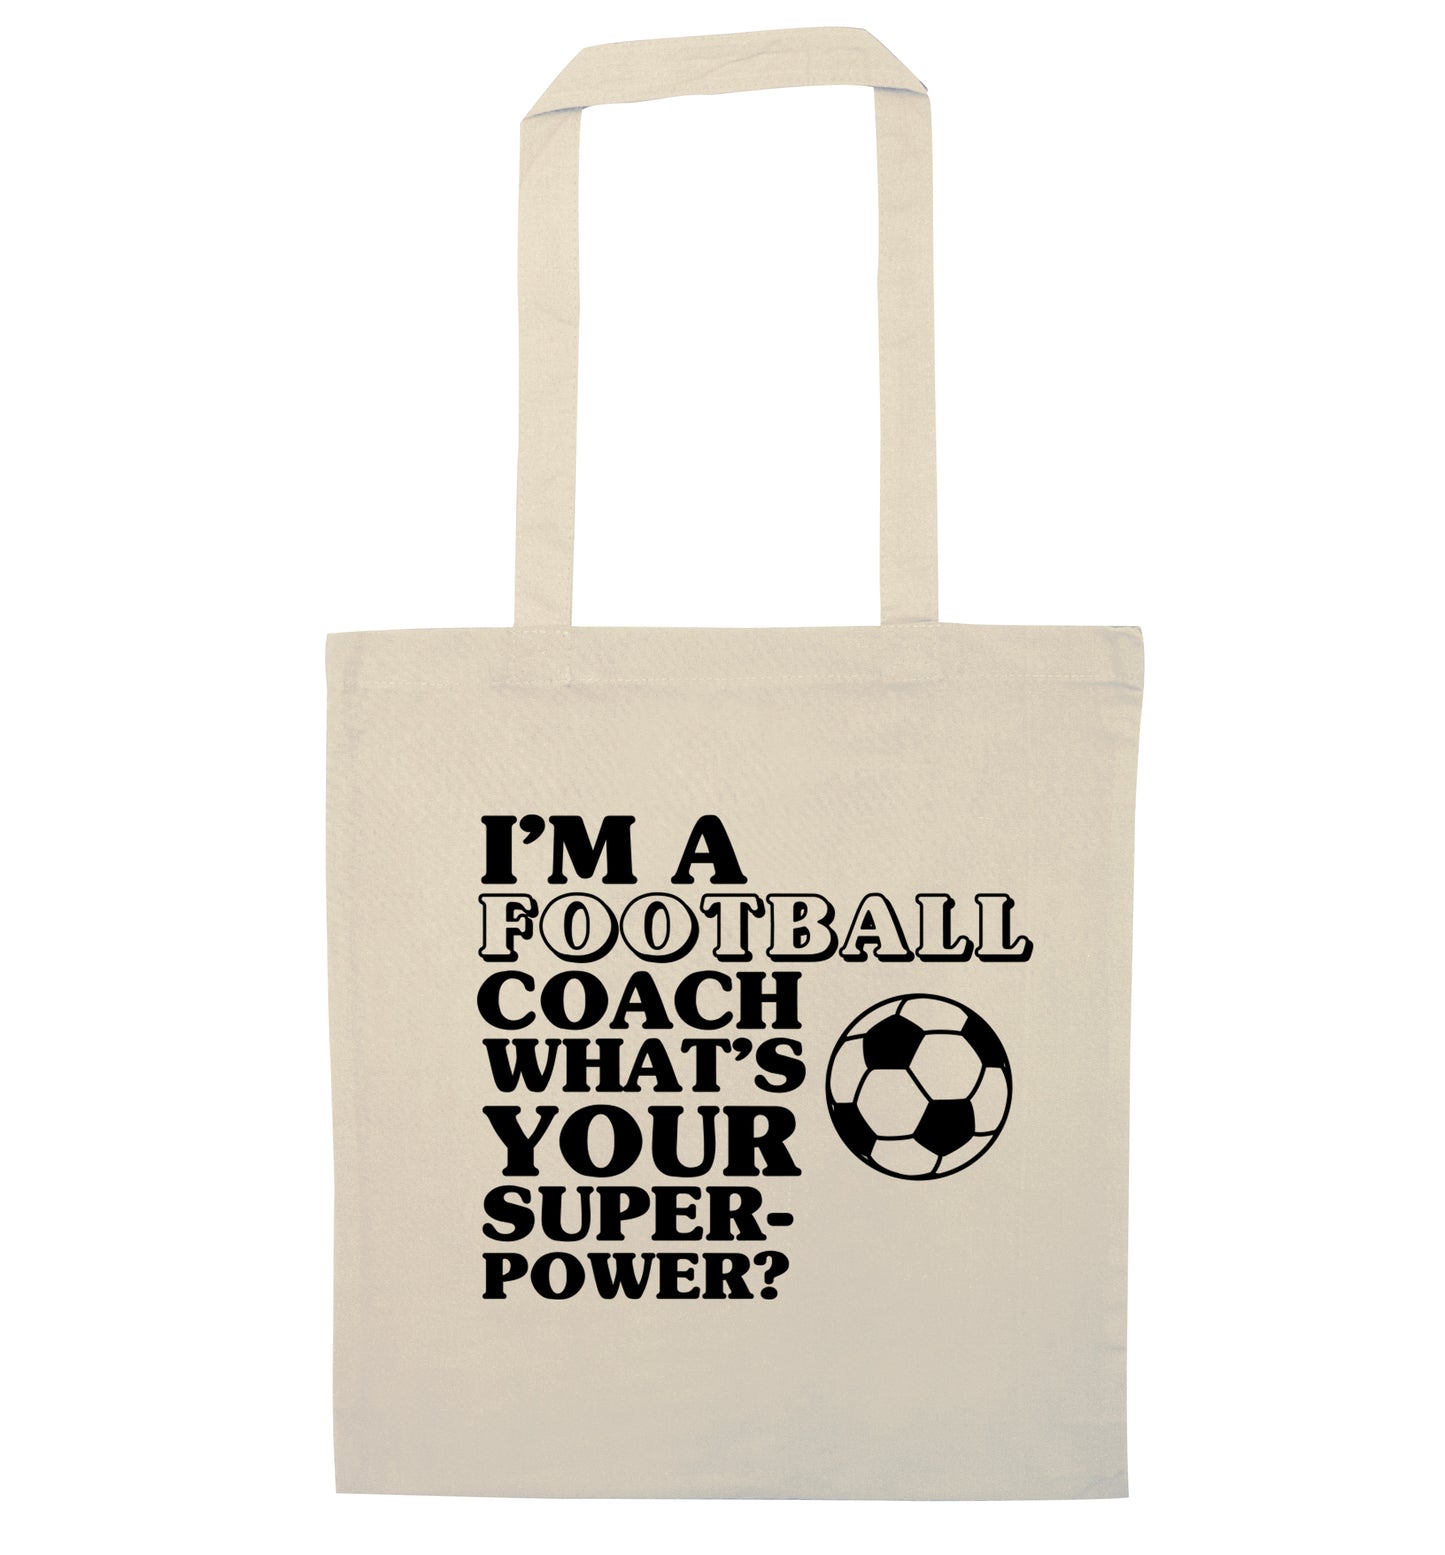 I'm a football coach what's your superpower? natural tote bag